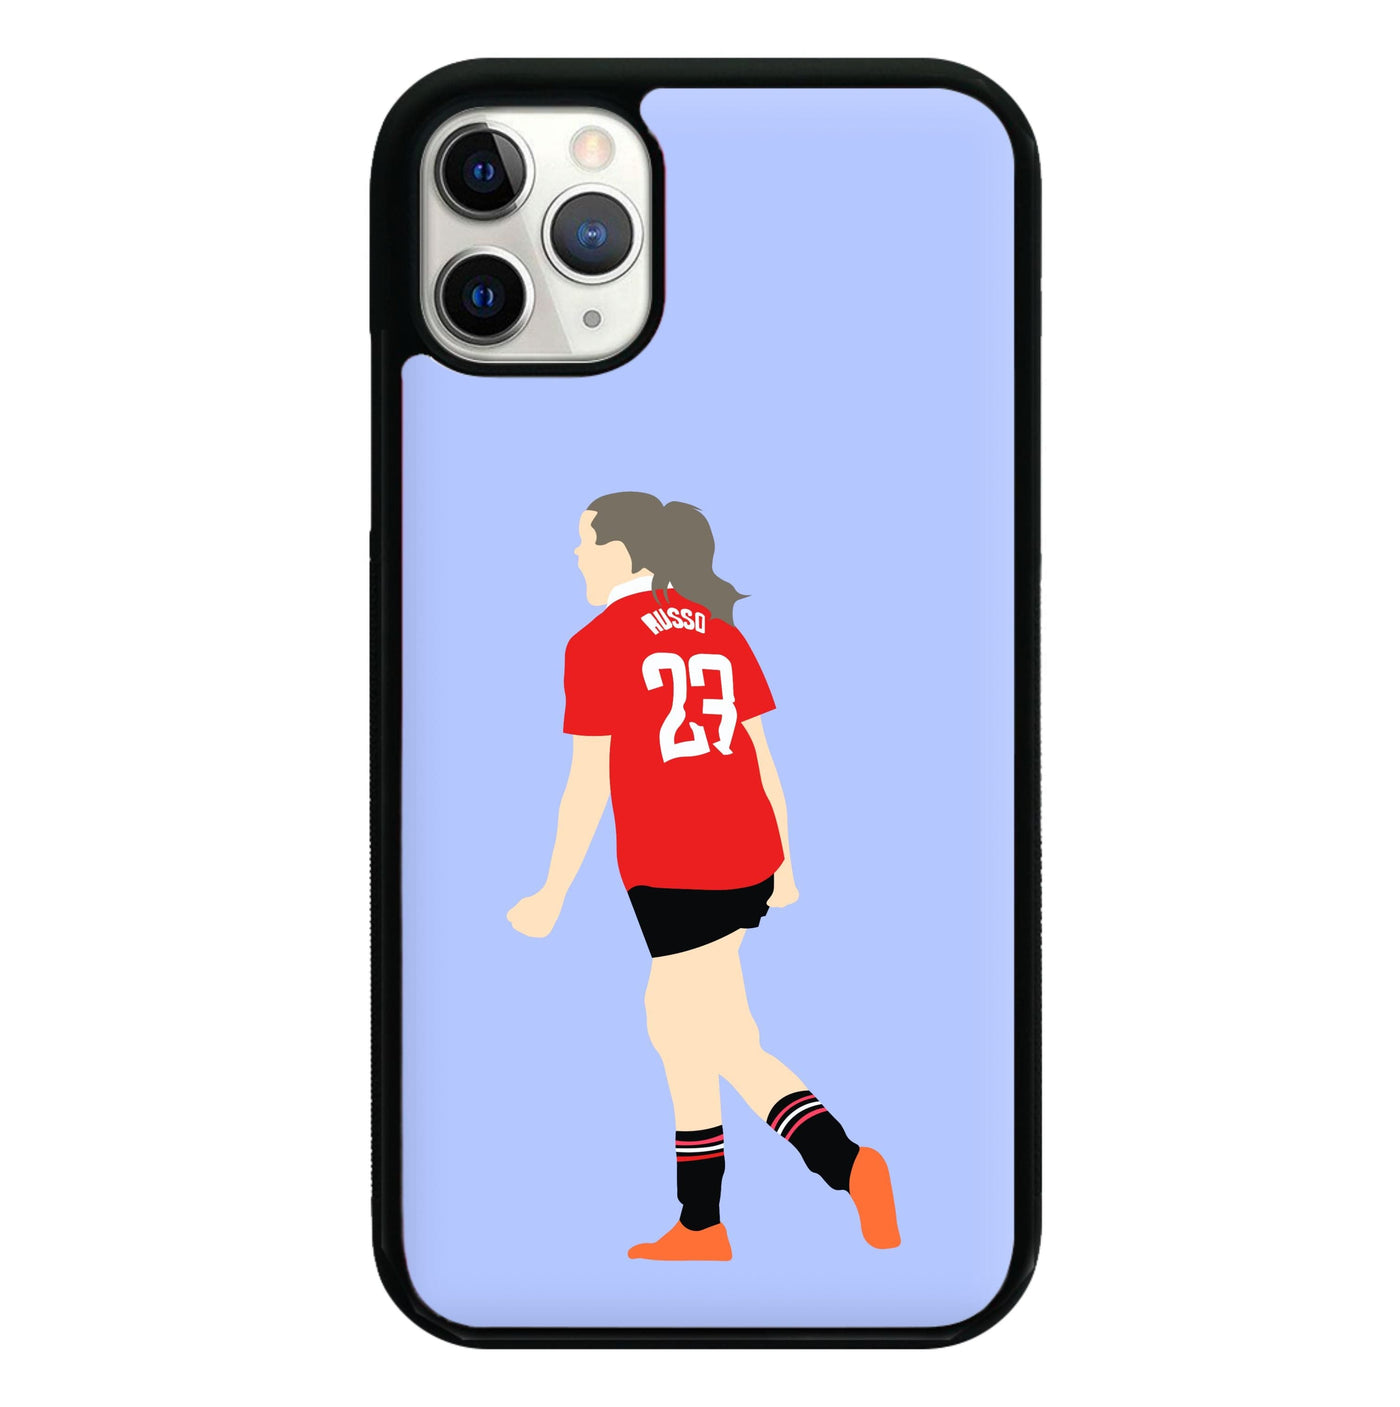 Alessia Russo - Womens World Cup Phone Case